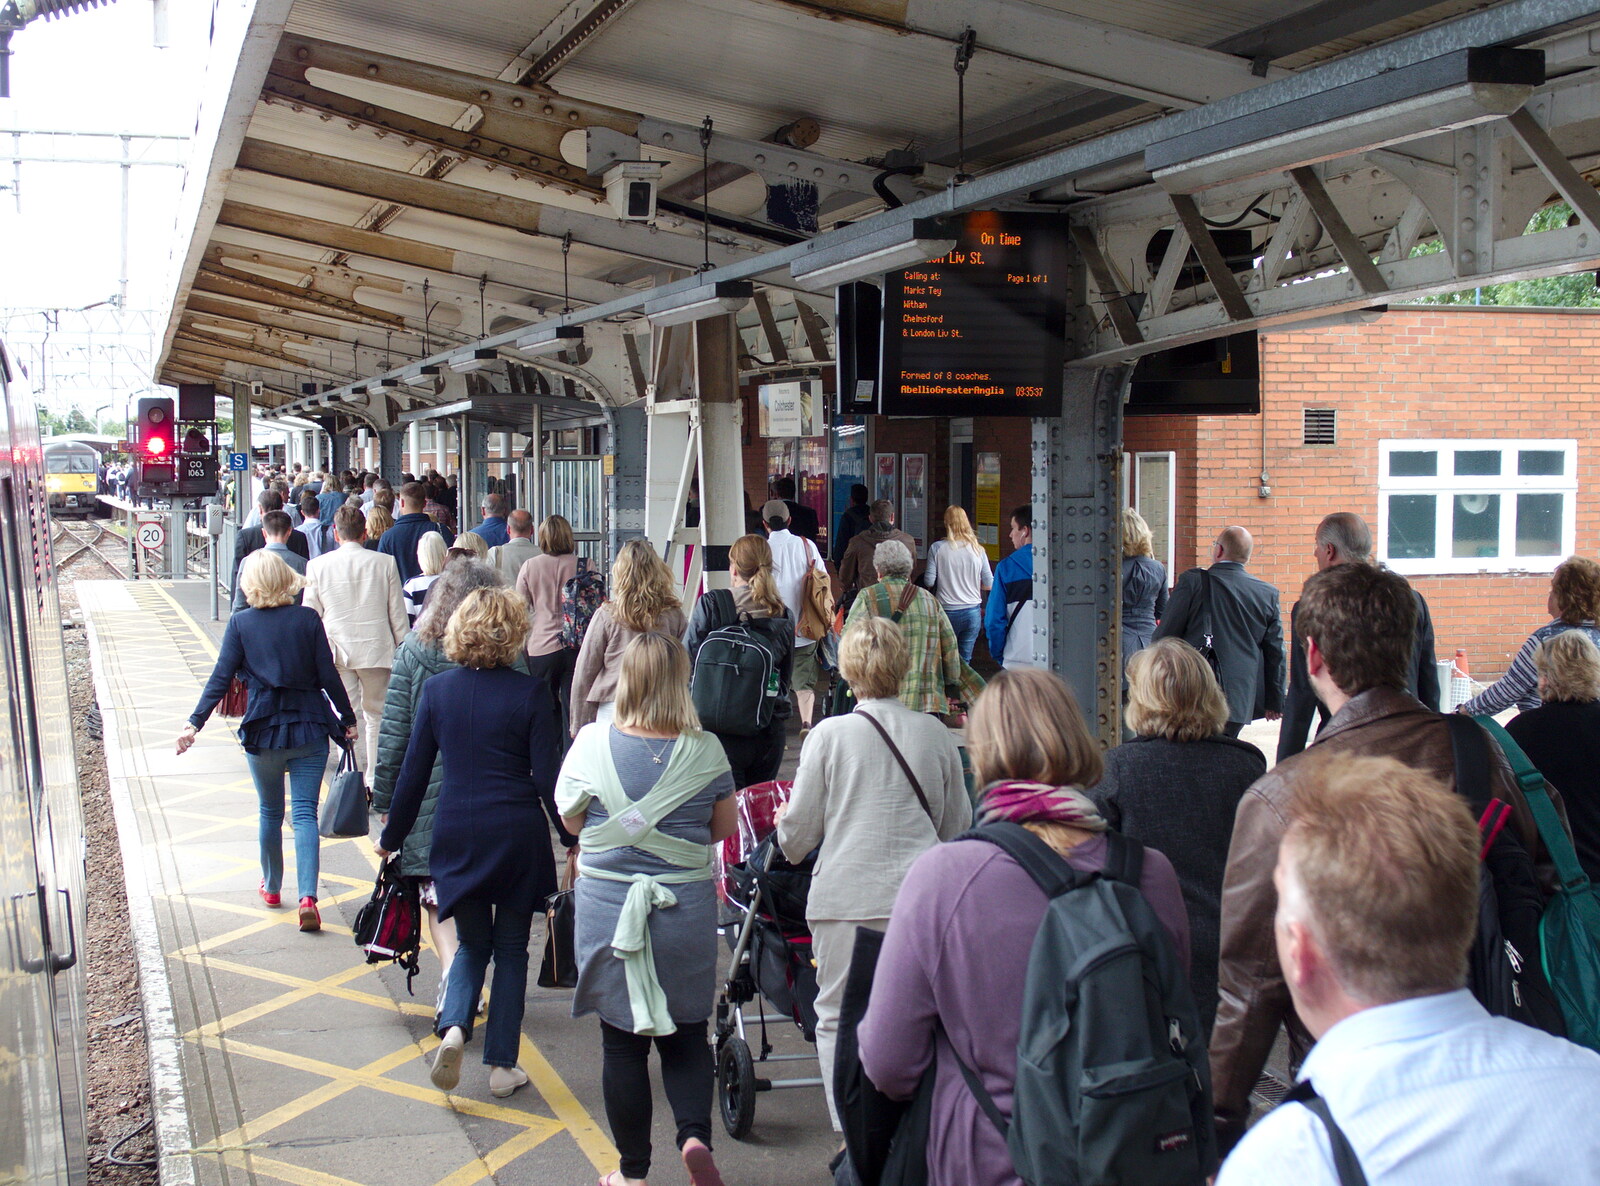 500 people pile off the terminated train at Colchester from Railway Hell: A Pantograph Story, Chelmsford, Essex - 17th June 2014